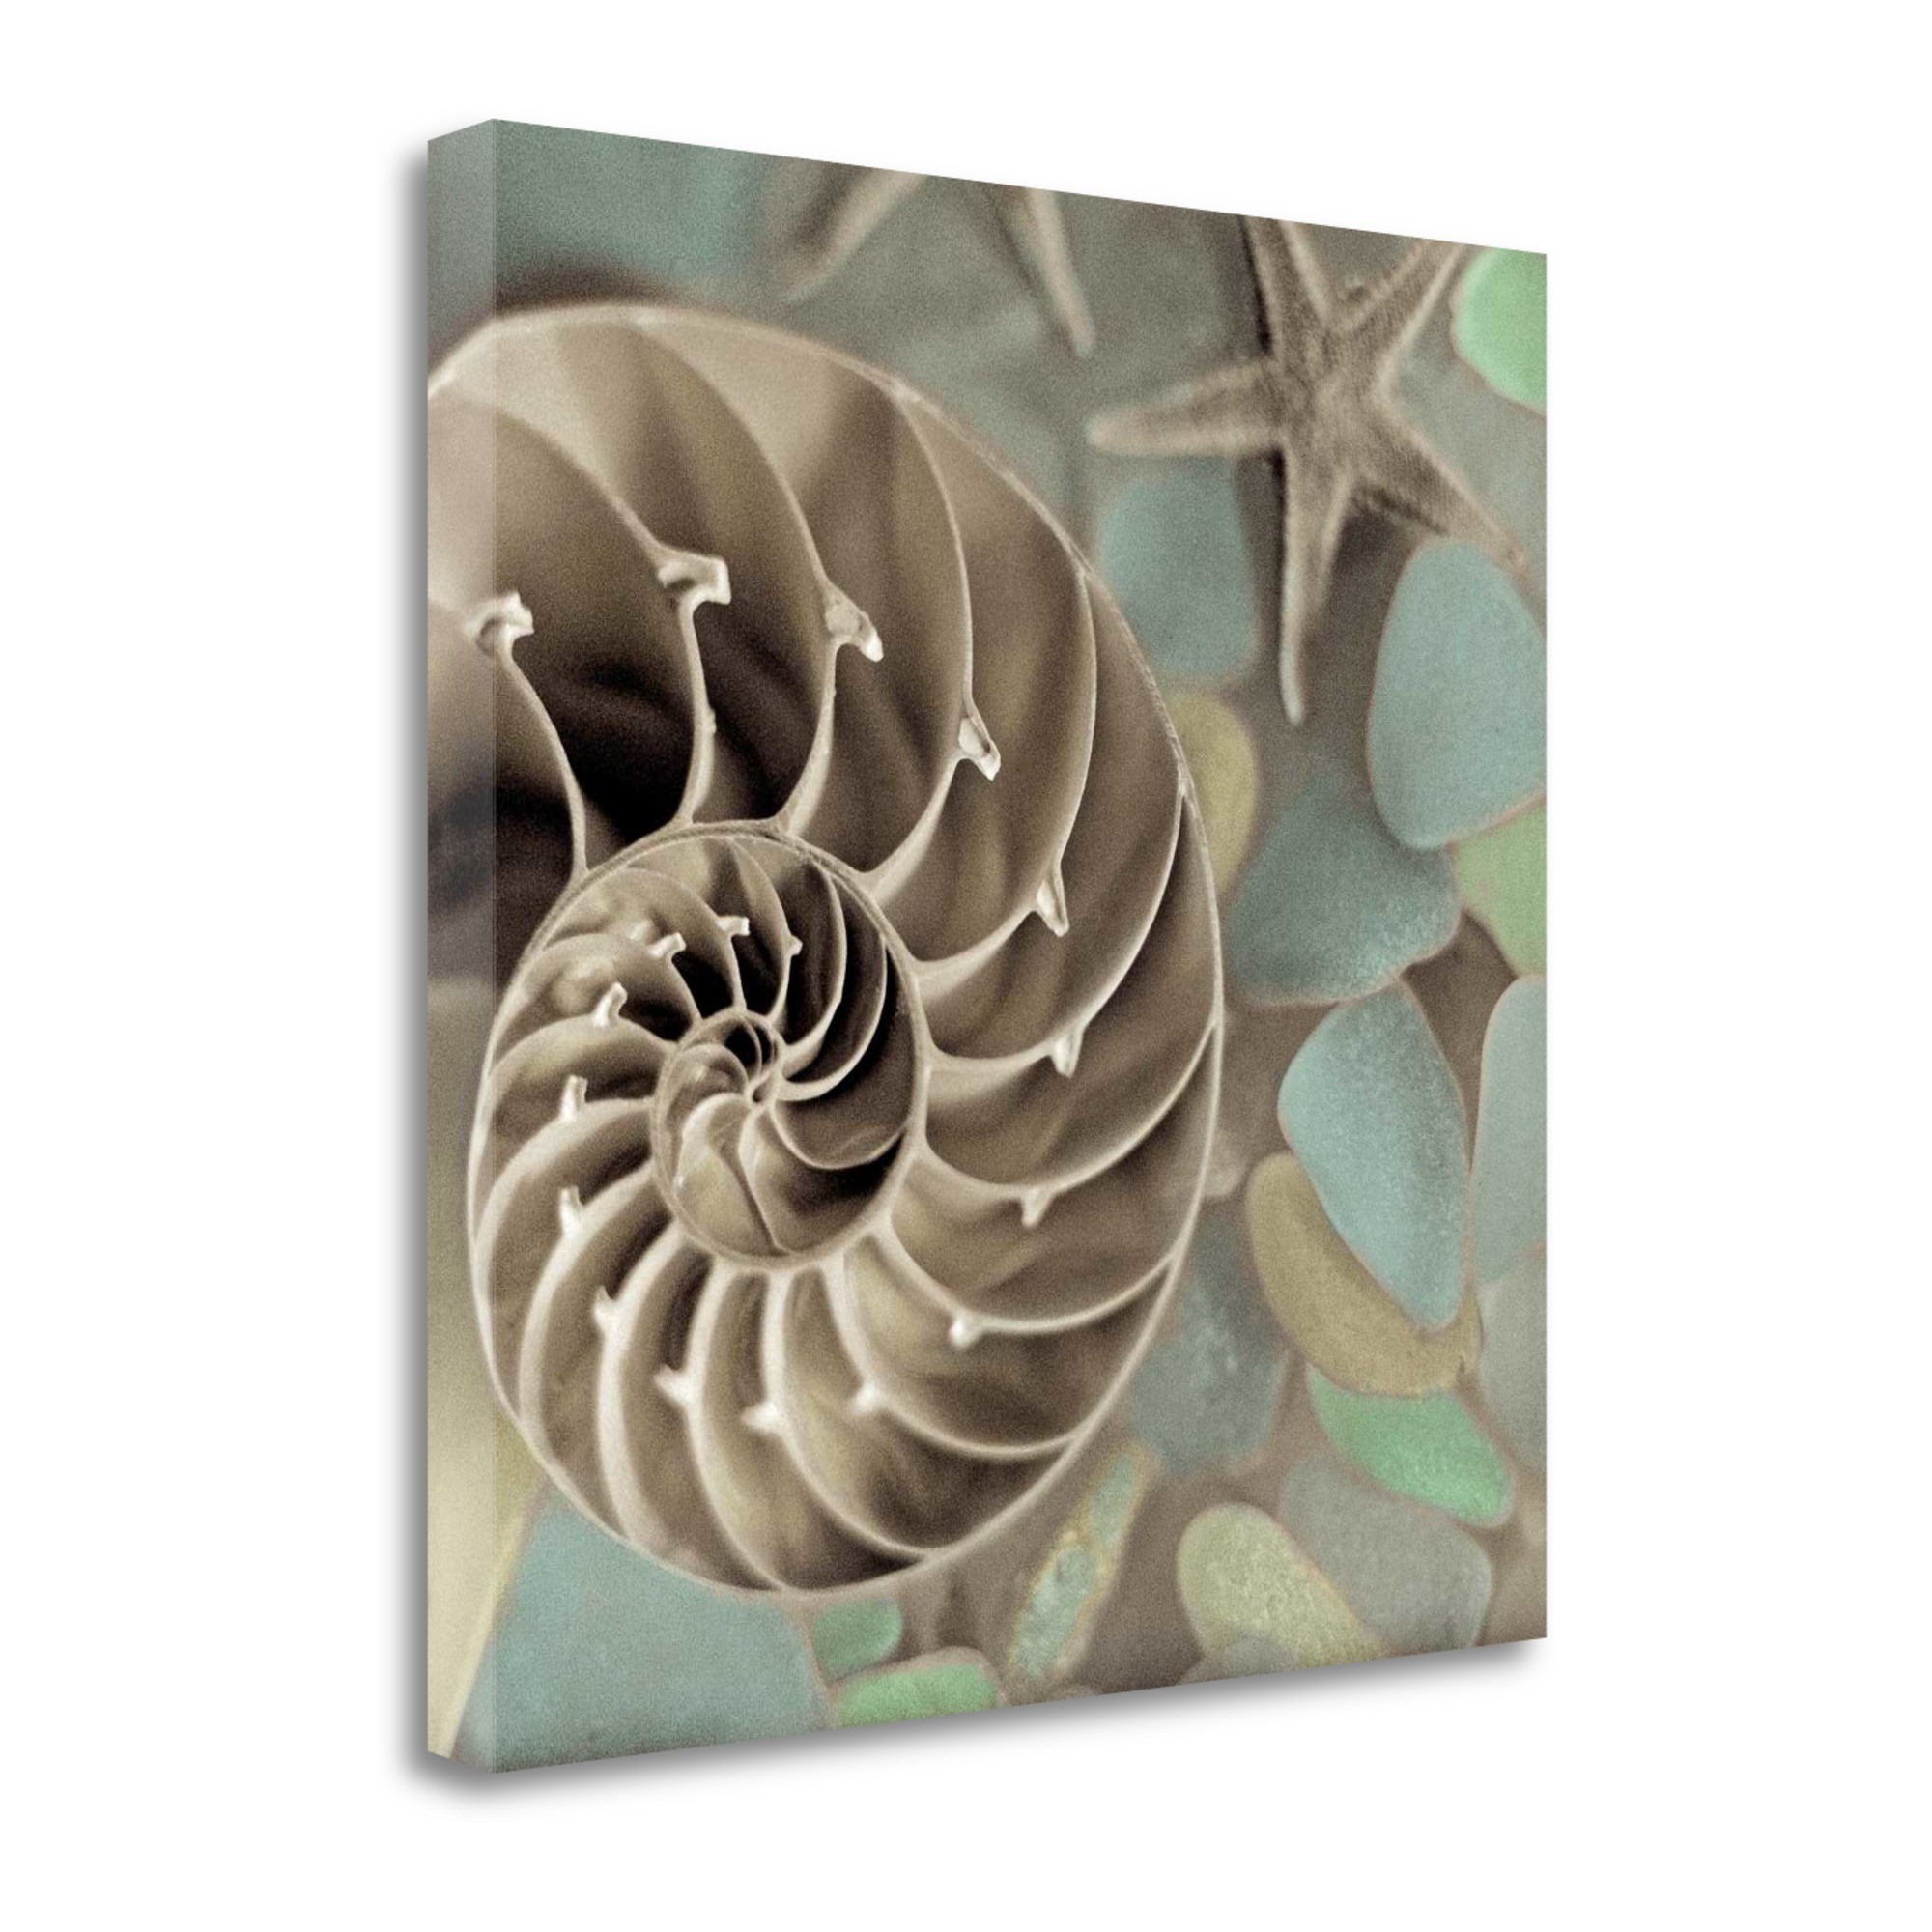 14" Snailshell and Seaglass 2 Giclee Wrap Canvas Wall Art